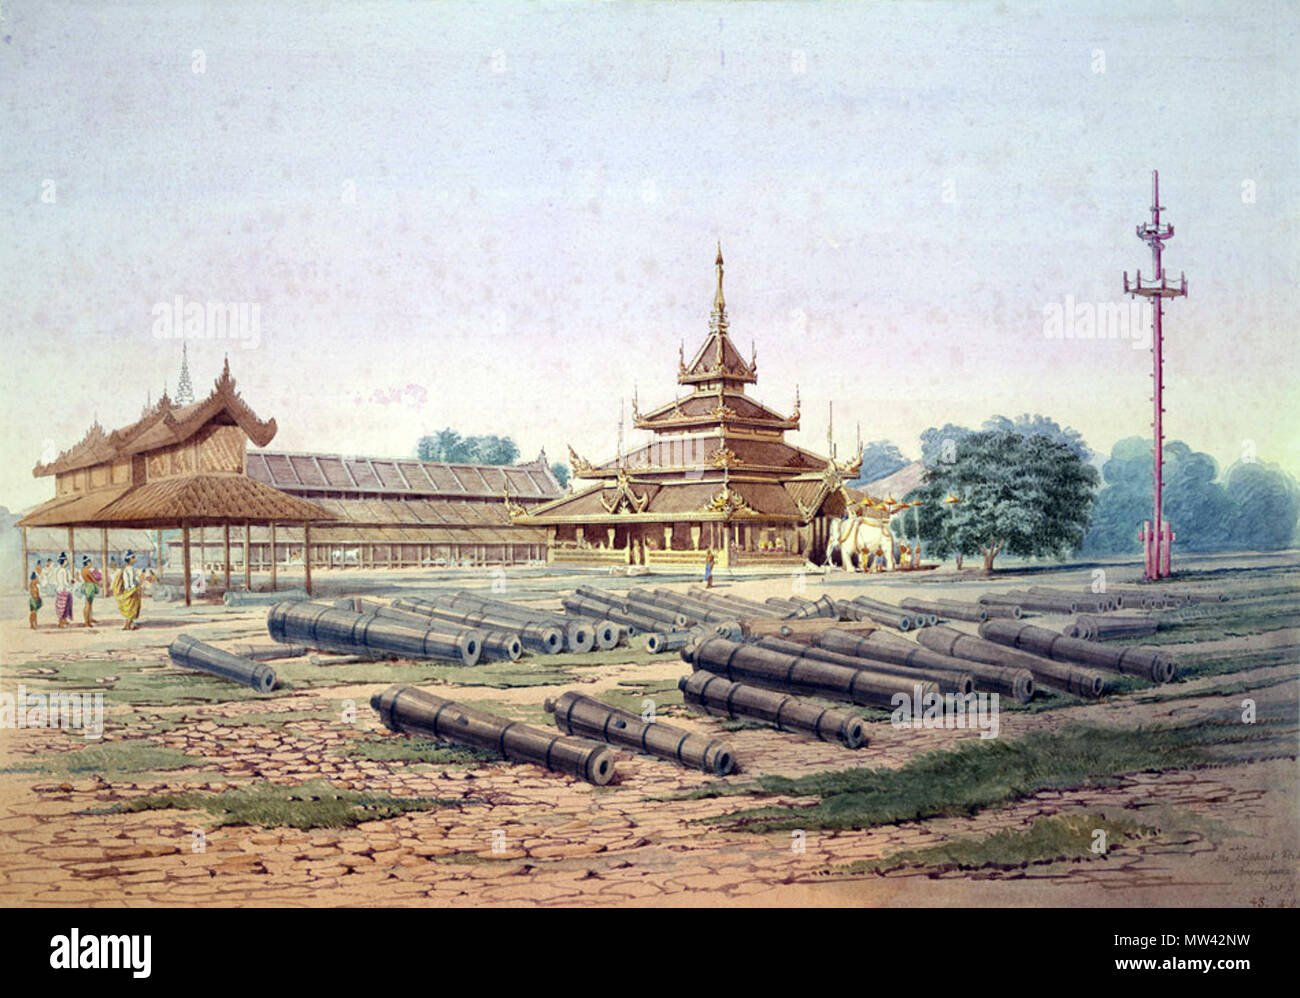 . English: Watercolour with pen and ink of the ceremonial pavilion in the Palace occupied by a rare and auspicious white elephant kept by the King from 'A Series of Views in Burmah taken during Major Phayre’s Mission to the Court of Ava in 1855' by Colesworthy Grant. This album consists of 106 landscapes and portraits of Burmese and Europeans documenting the British embassy to the Burmese King, Mindon Min (r.1853-1878). The mission to Amarapura took place after the Second Anglo-Burmese War in 1852 and the annexation by the British of the Burmese province of Pegu (Bago). It was despatched by th Stock Photo